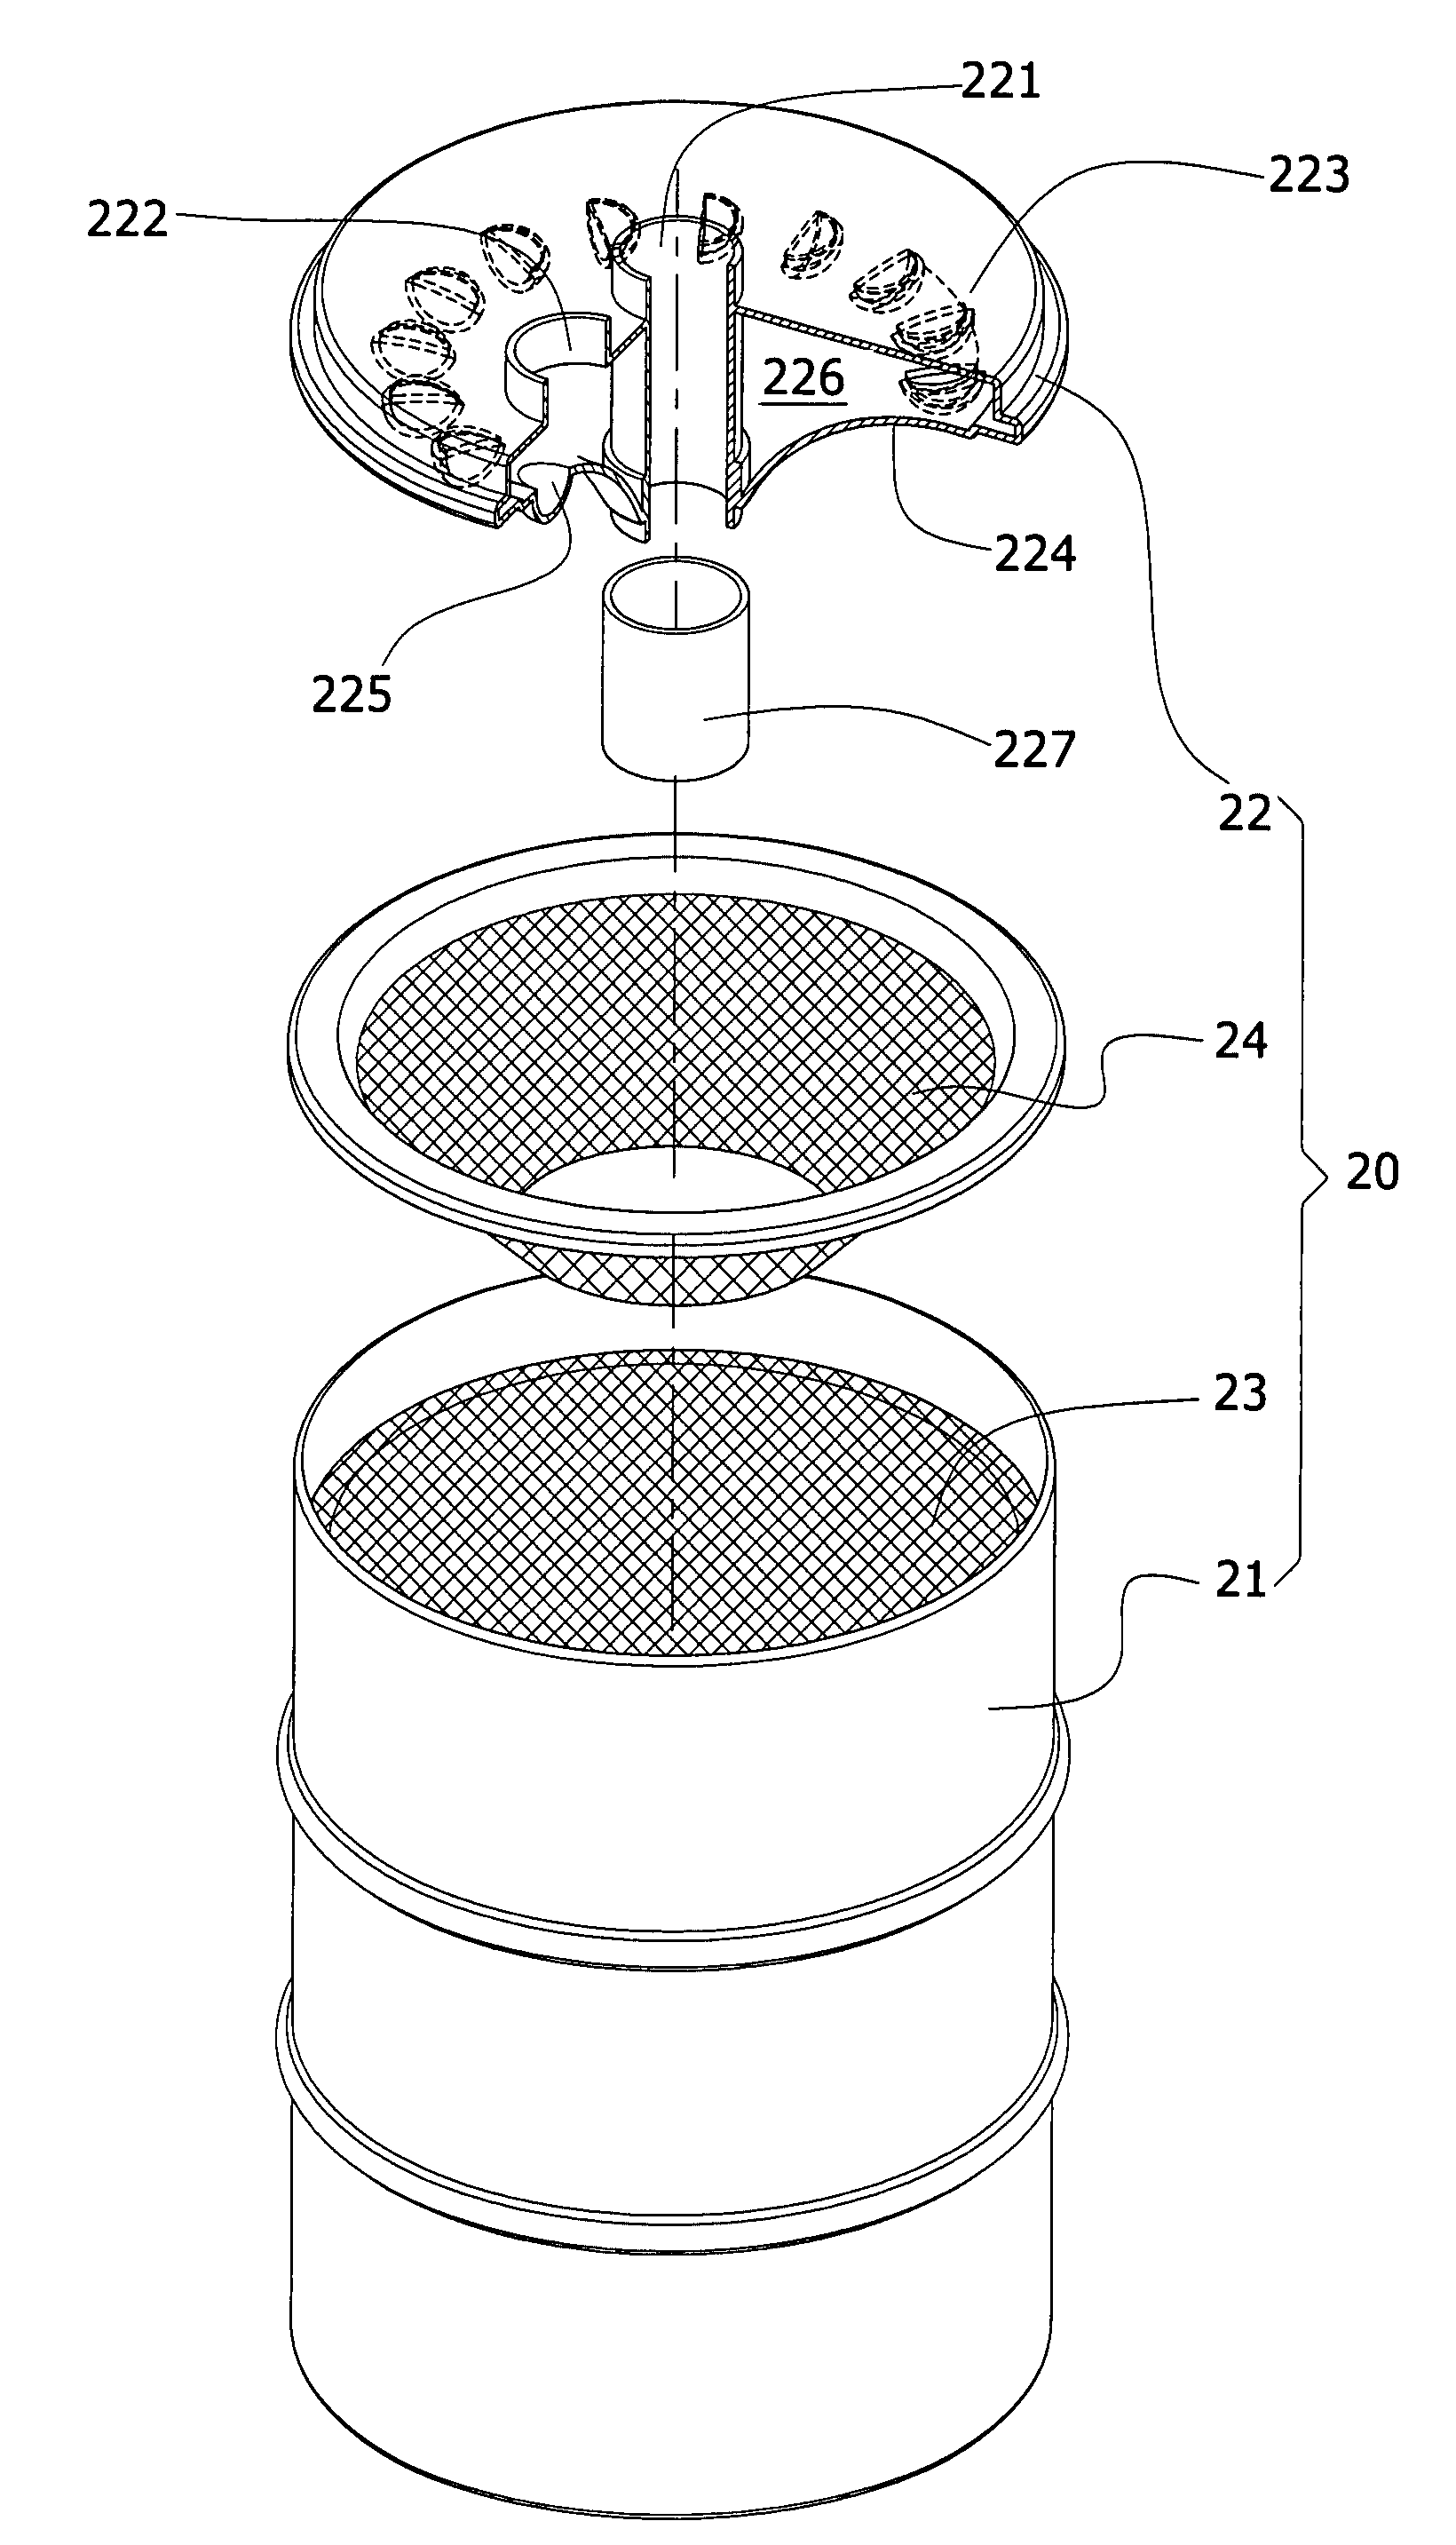 Structure of an impurities collecting bucket for an air separator and purifier